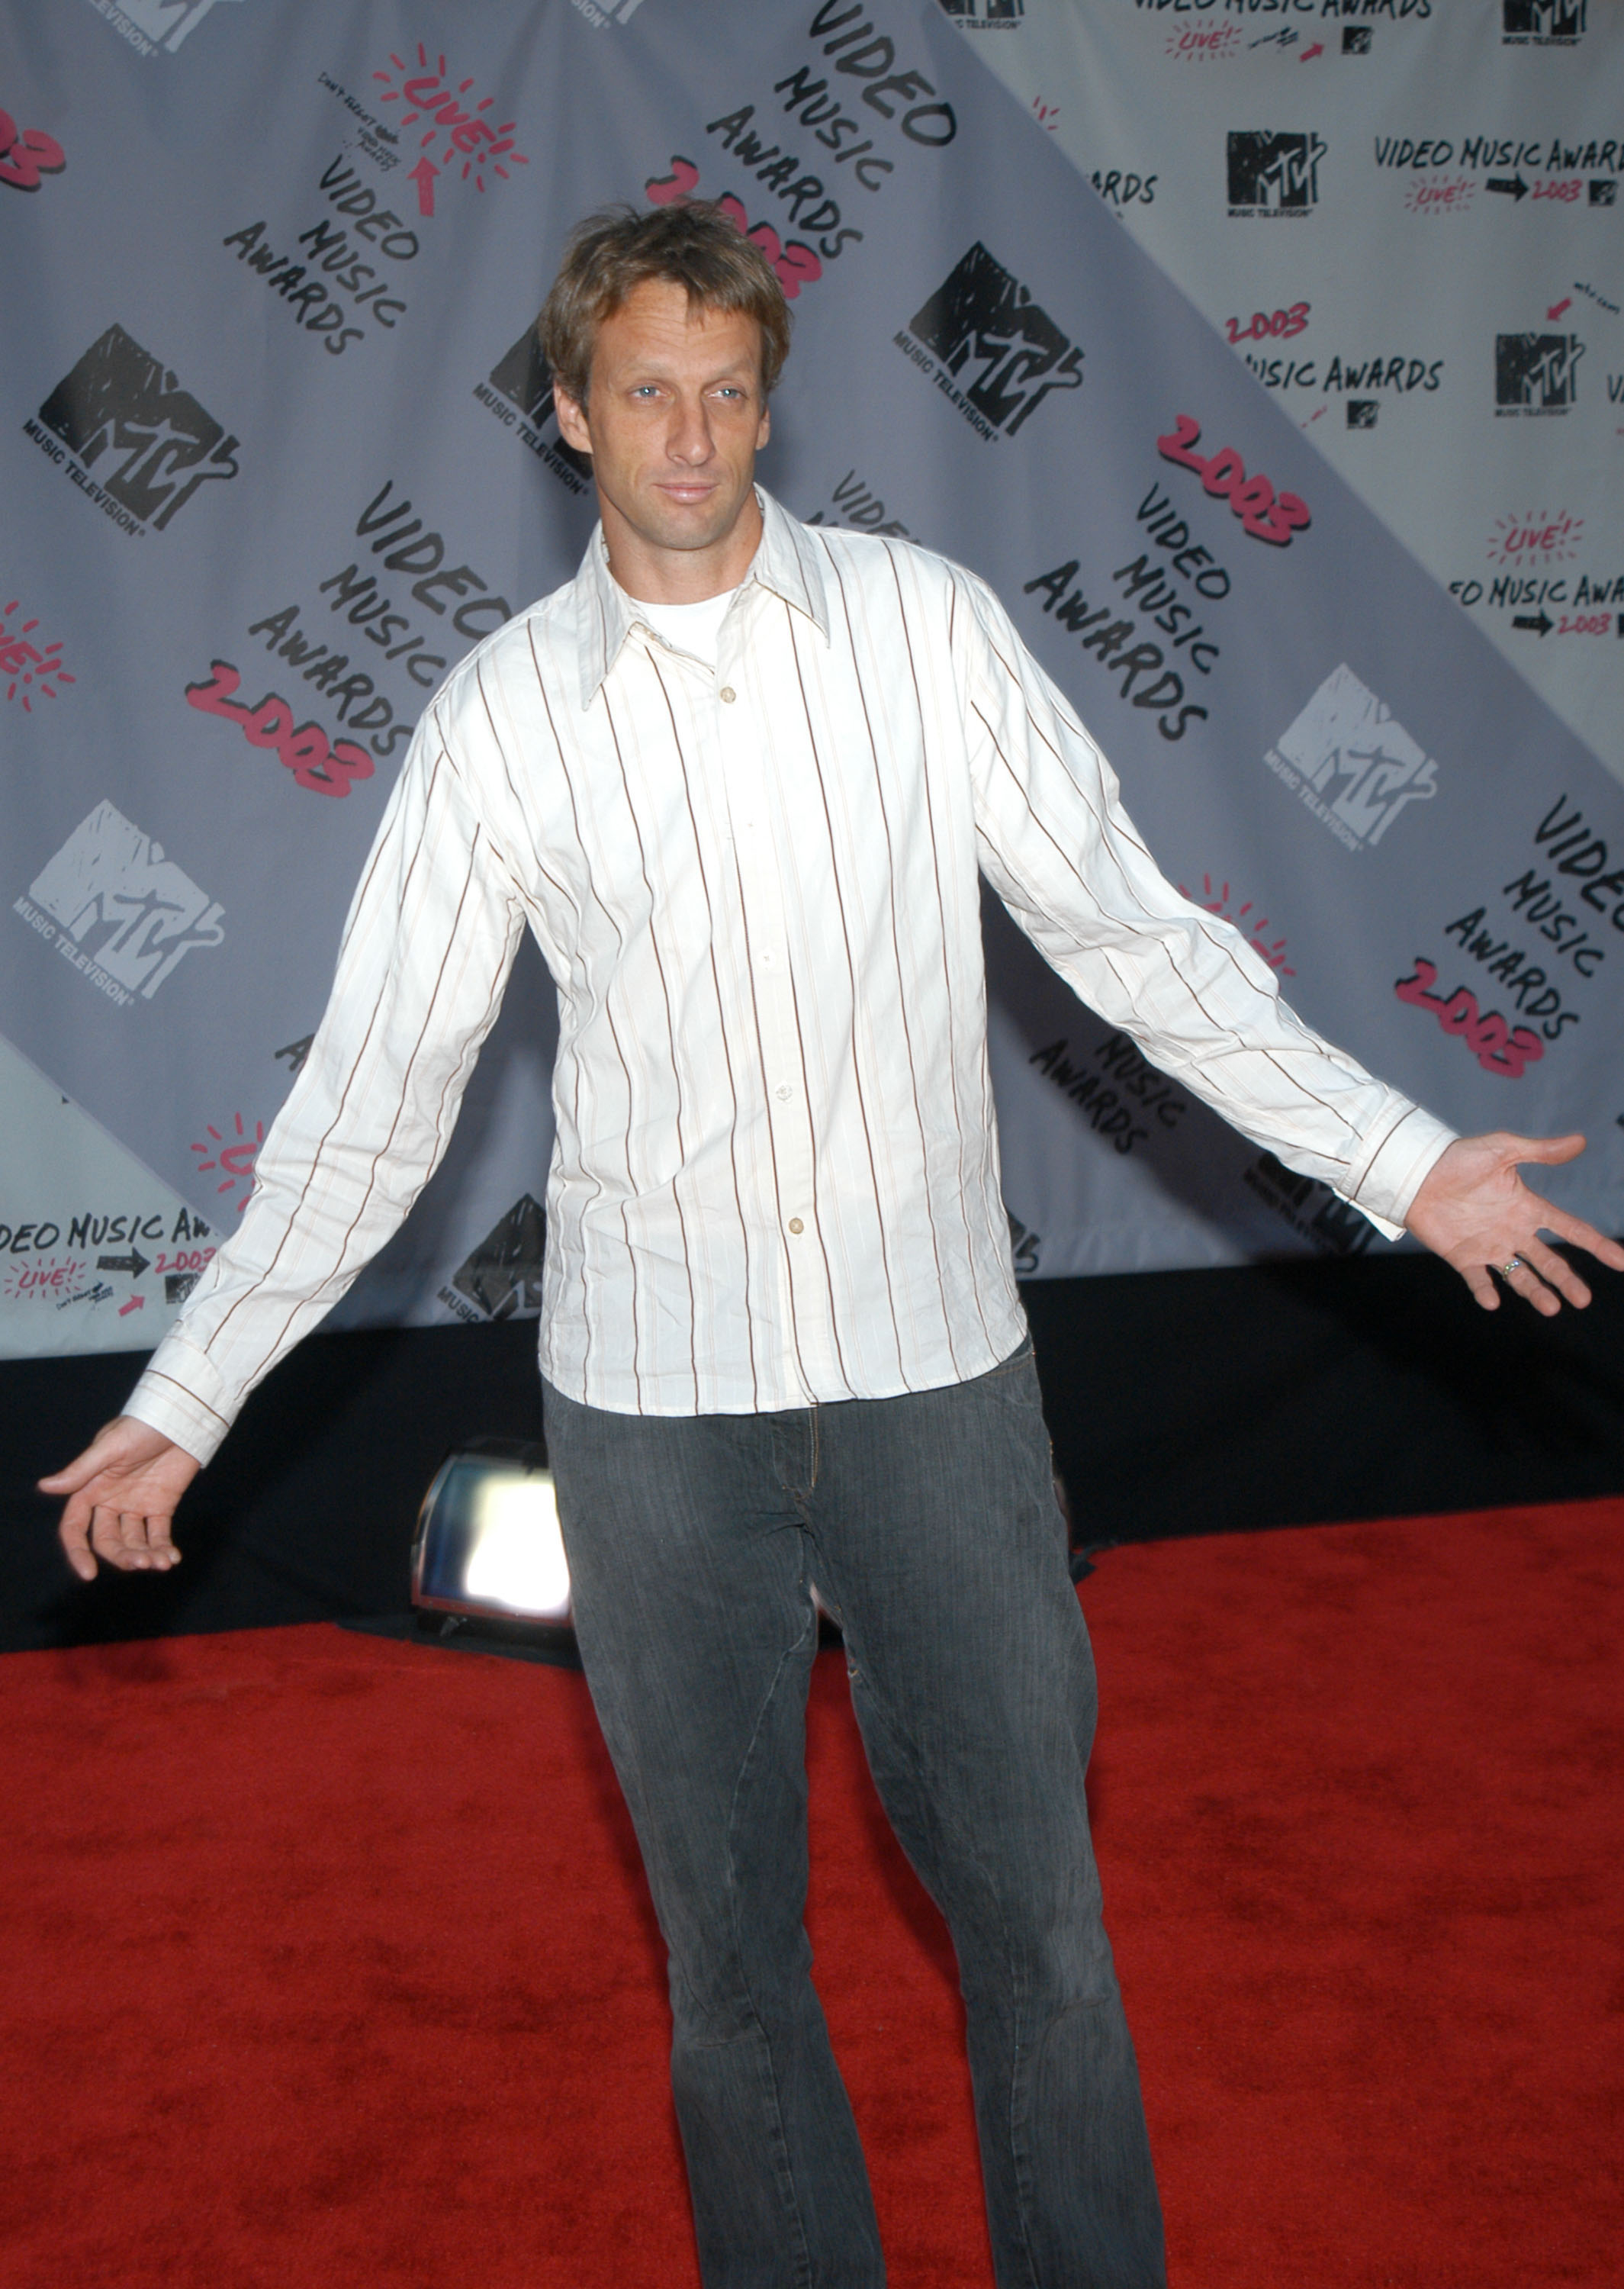 closeup of him in jeans on the read carpet